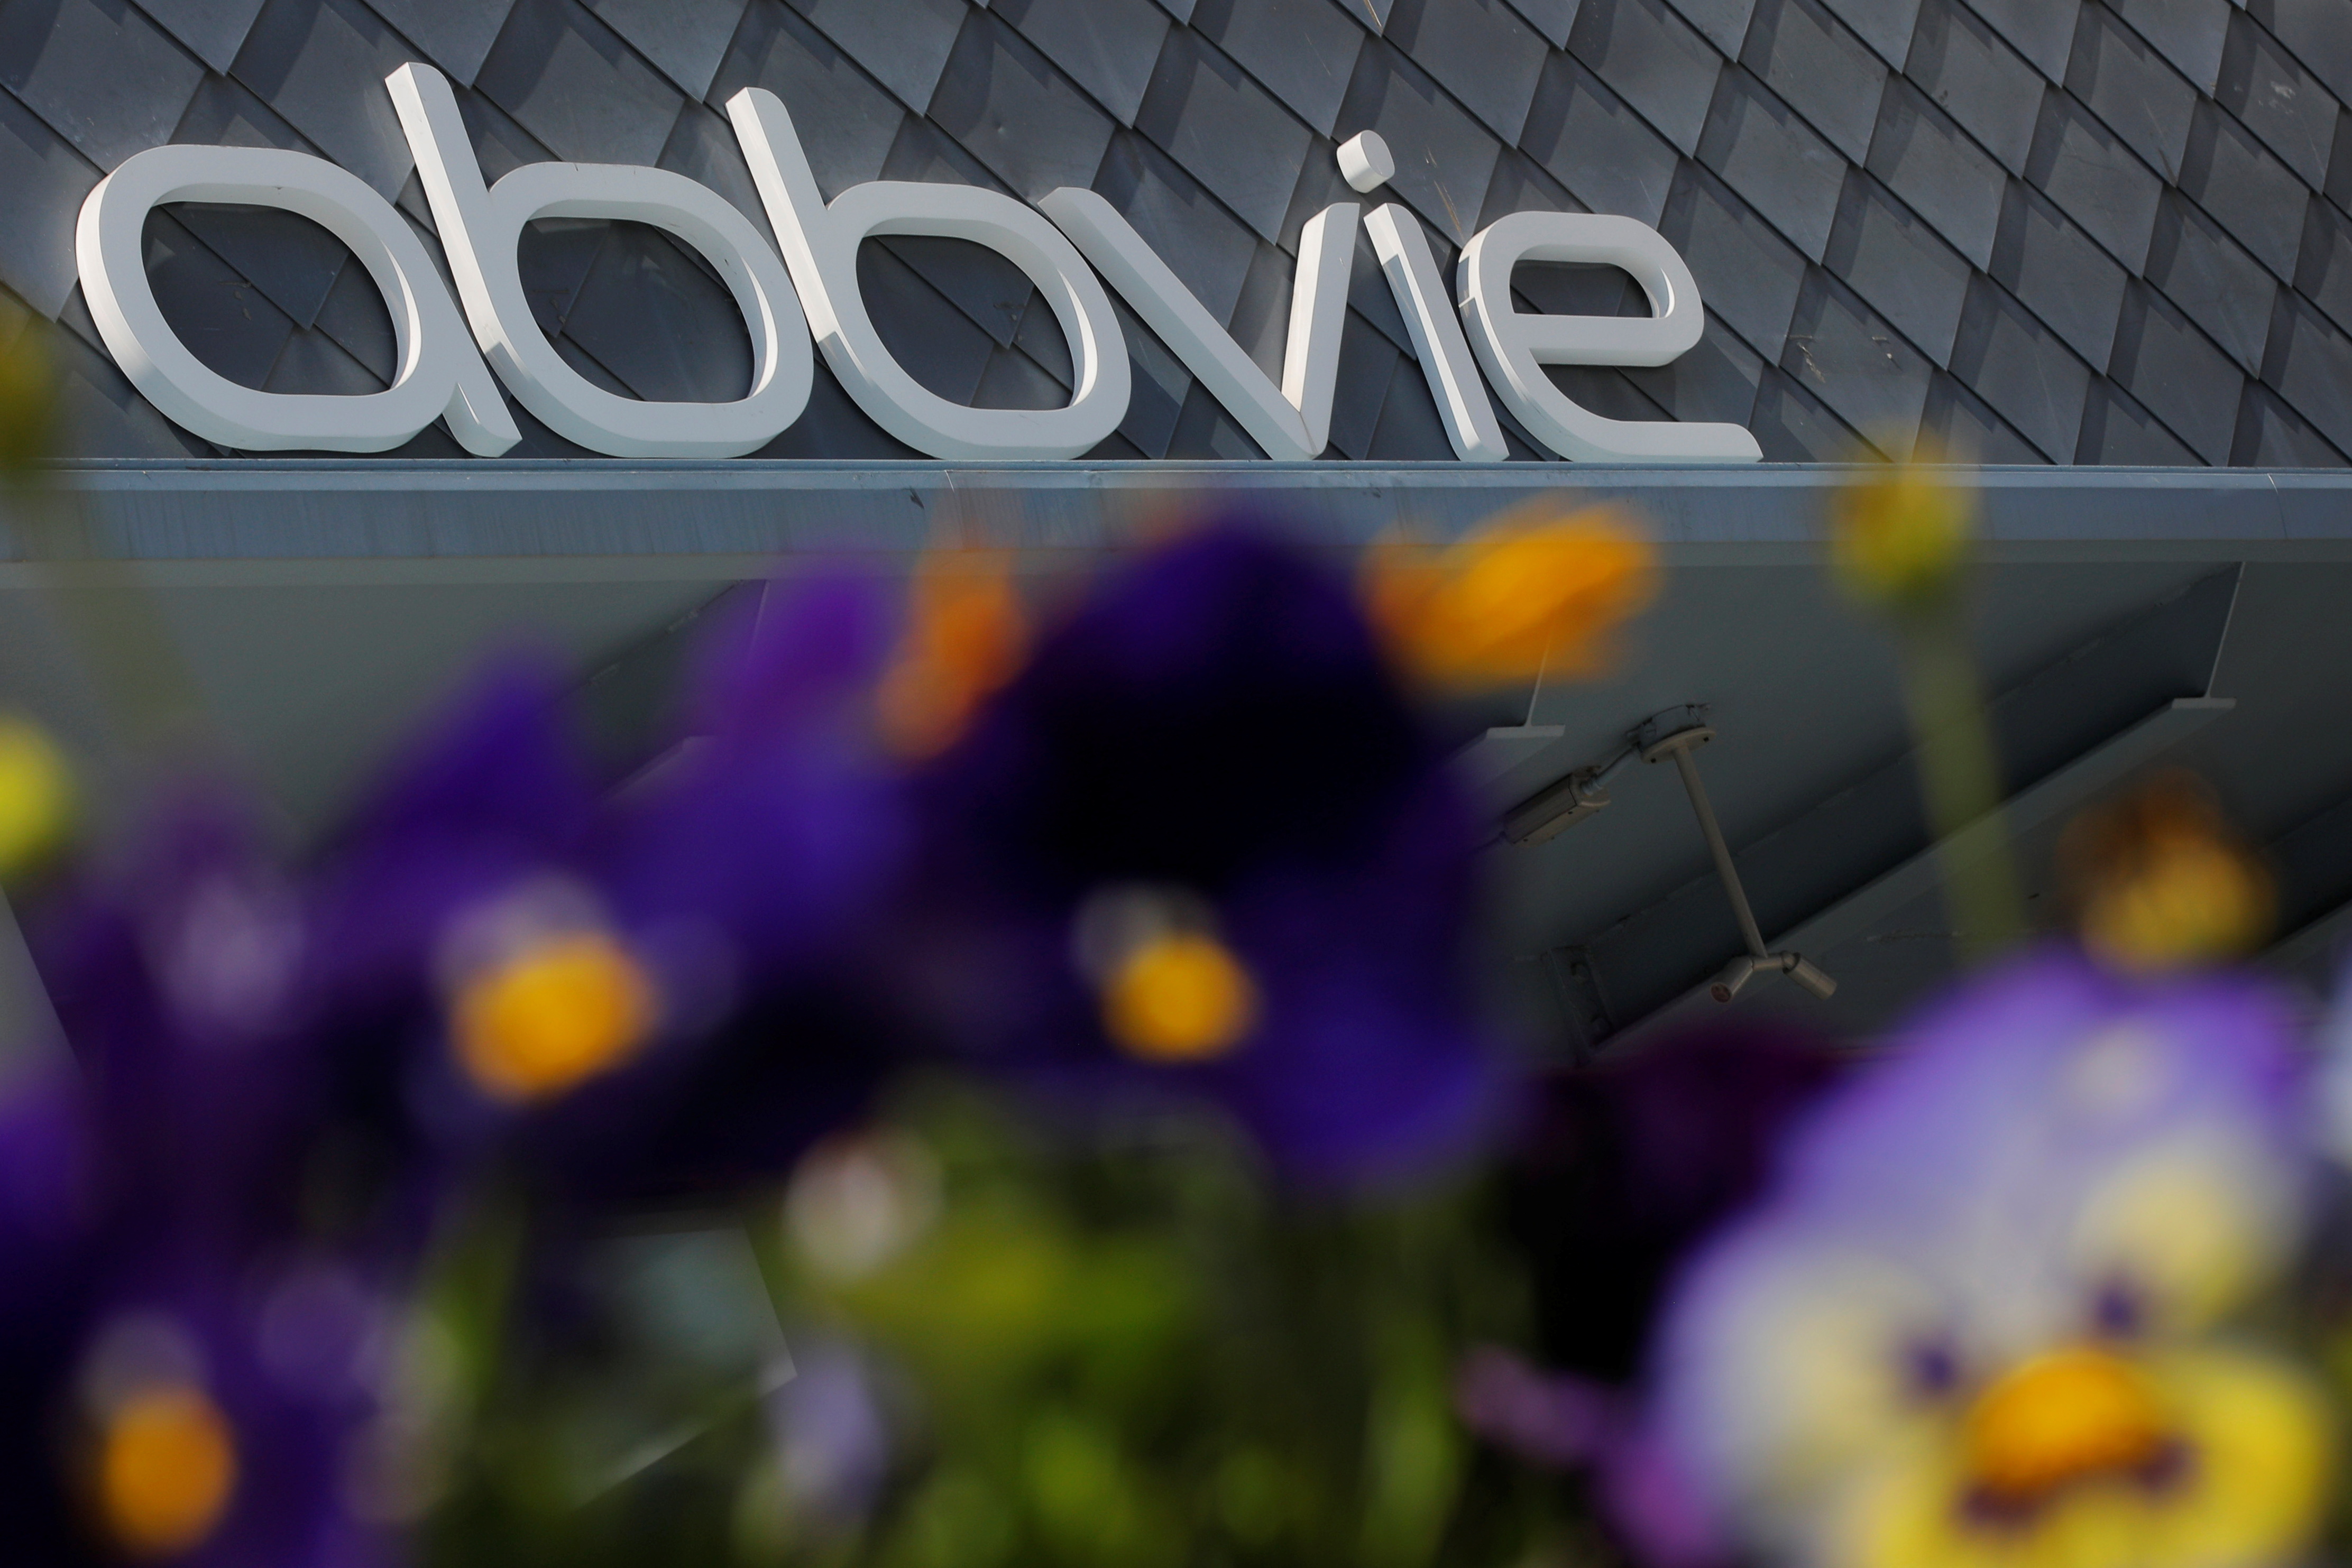 A sign stands outside a Abbvie facility in Cambridge